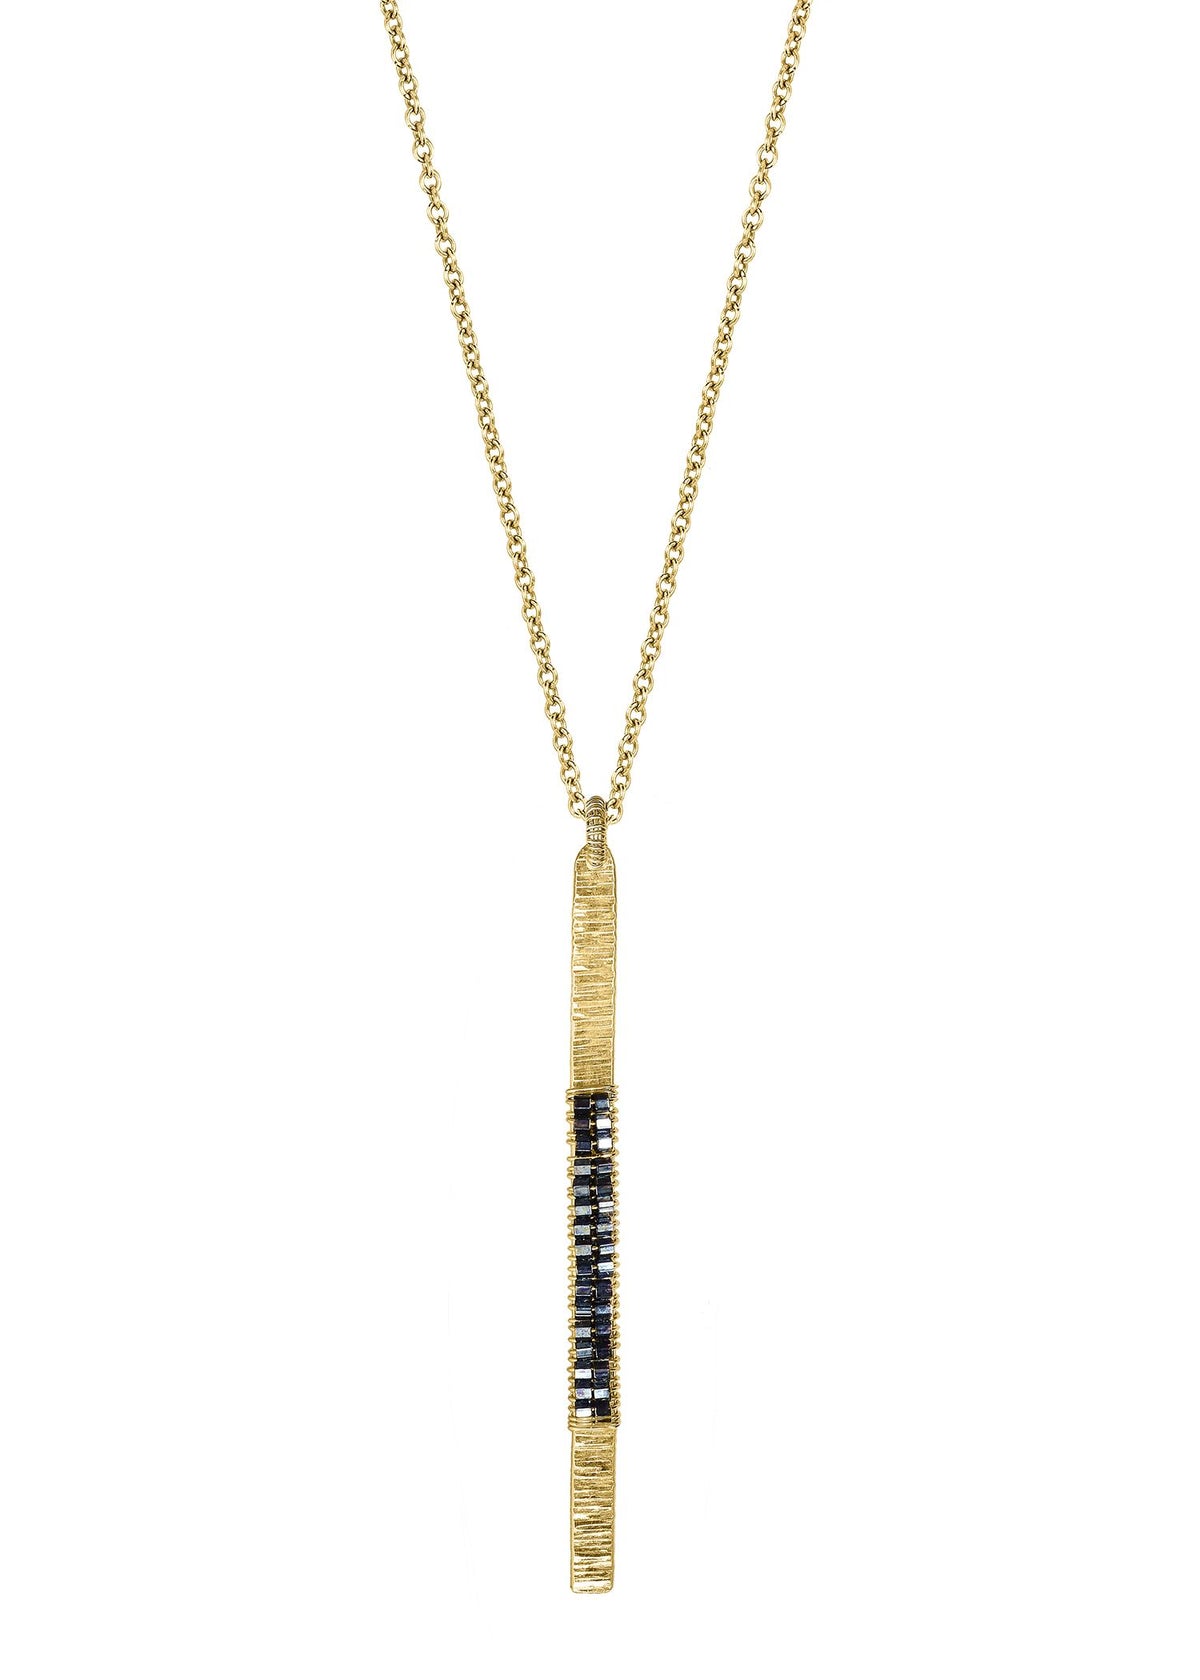 Dark hematite seed beads 14k gold fill Necklace measures 16-1/2&quot; in length Pendant measures 2 in length and 1/8&quot; in width Handmade in our Los Angeles studio